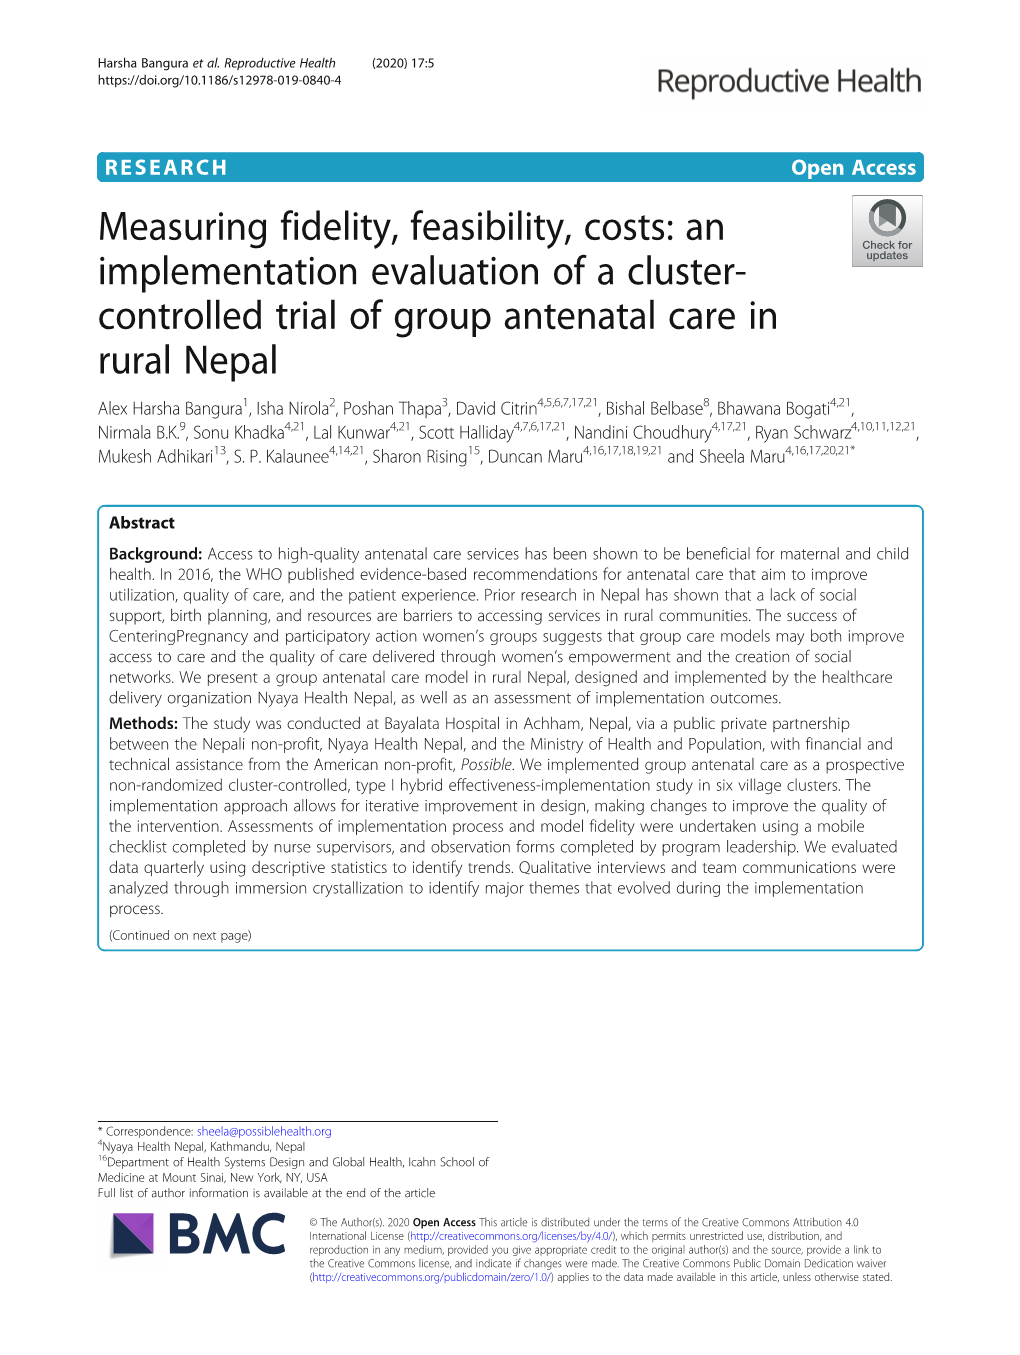 Controlled Trial of Group Antenatal Care in Rural Nepal